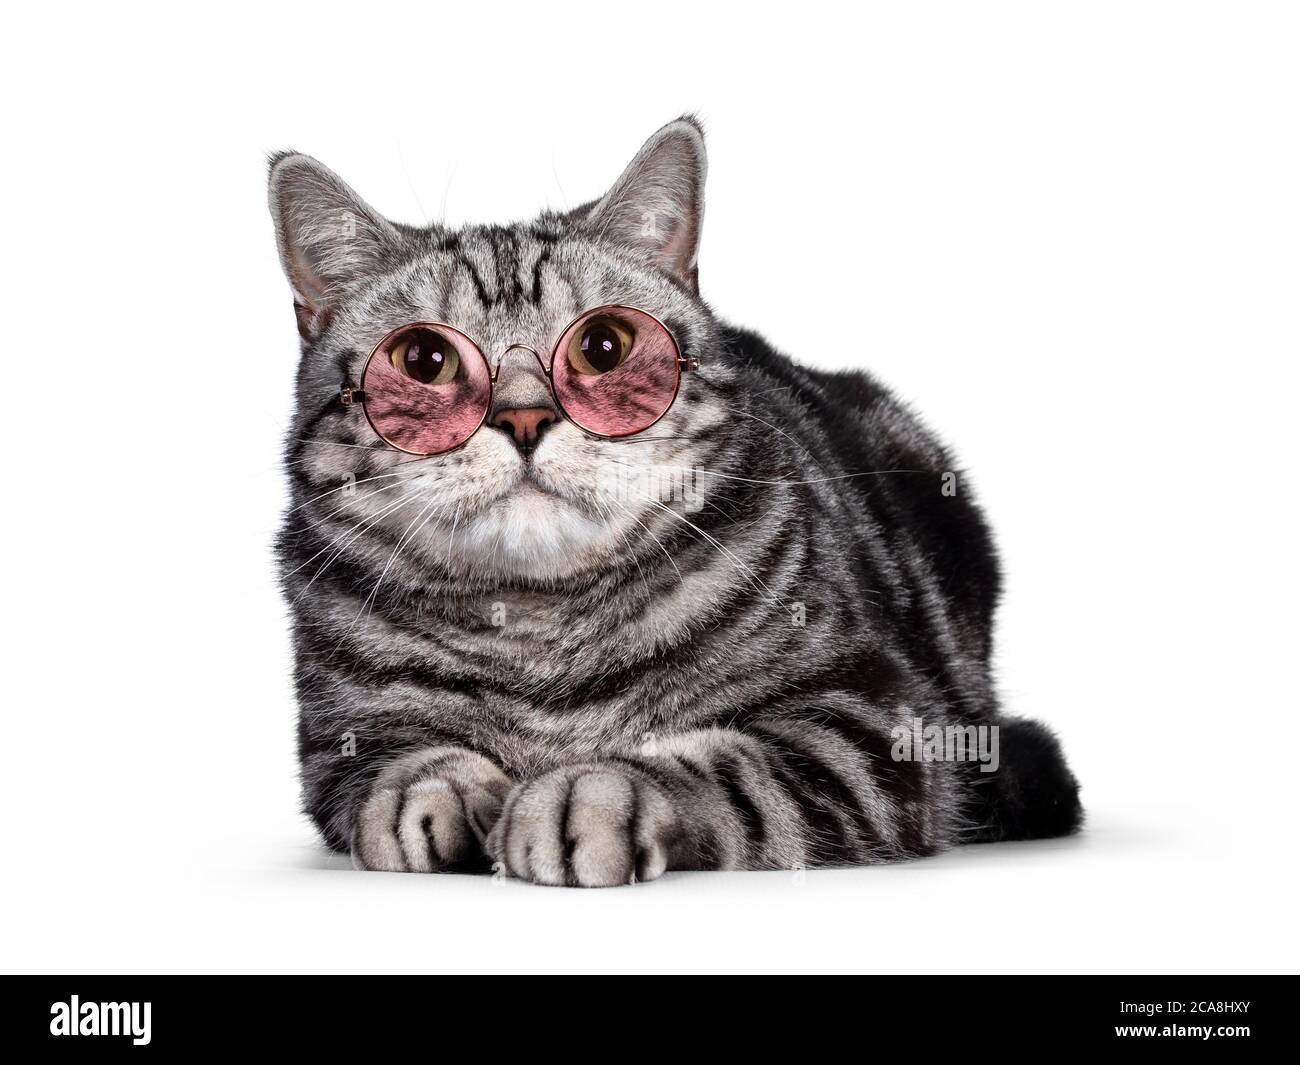 Handsome silver tabby blotched British Shorthair adult male cat. Laying down facing front, looking above camera with green eyes and wearing glasses wi Stock Photo